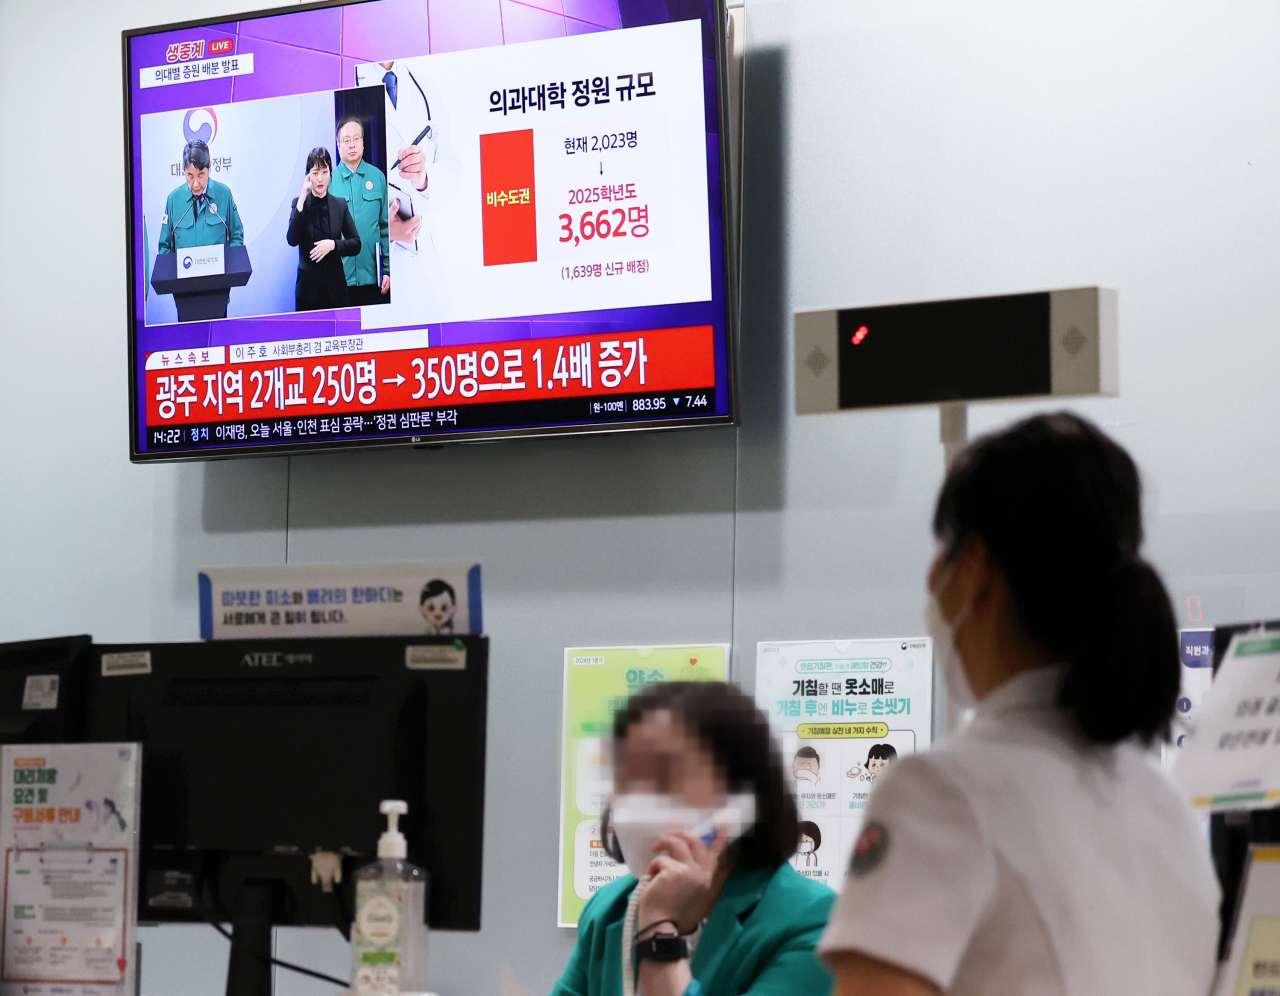 Medical personnel are seen at Chonnam National University Hospital in Gwangju on Wednesday. (Yonhap)